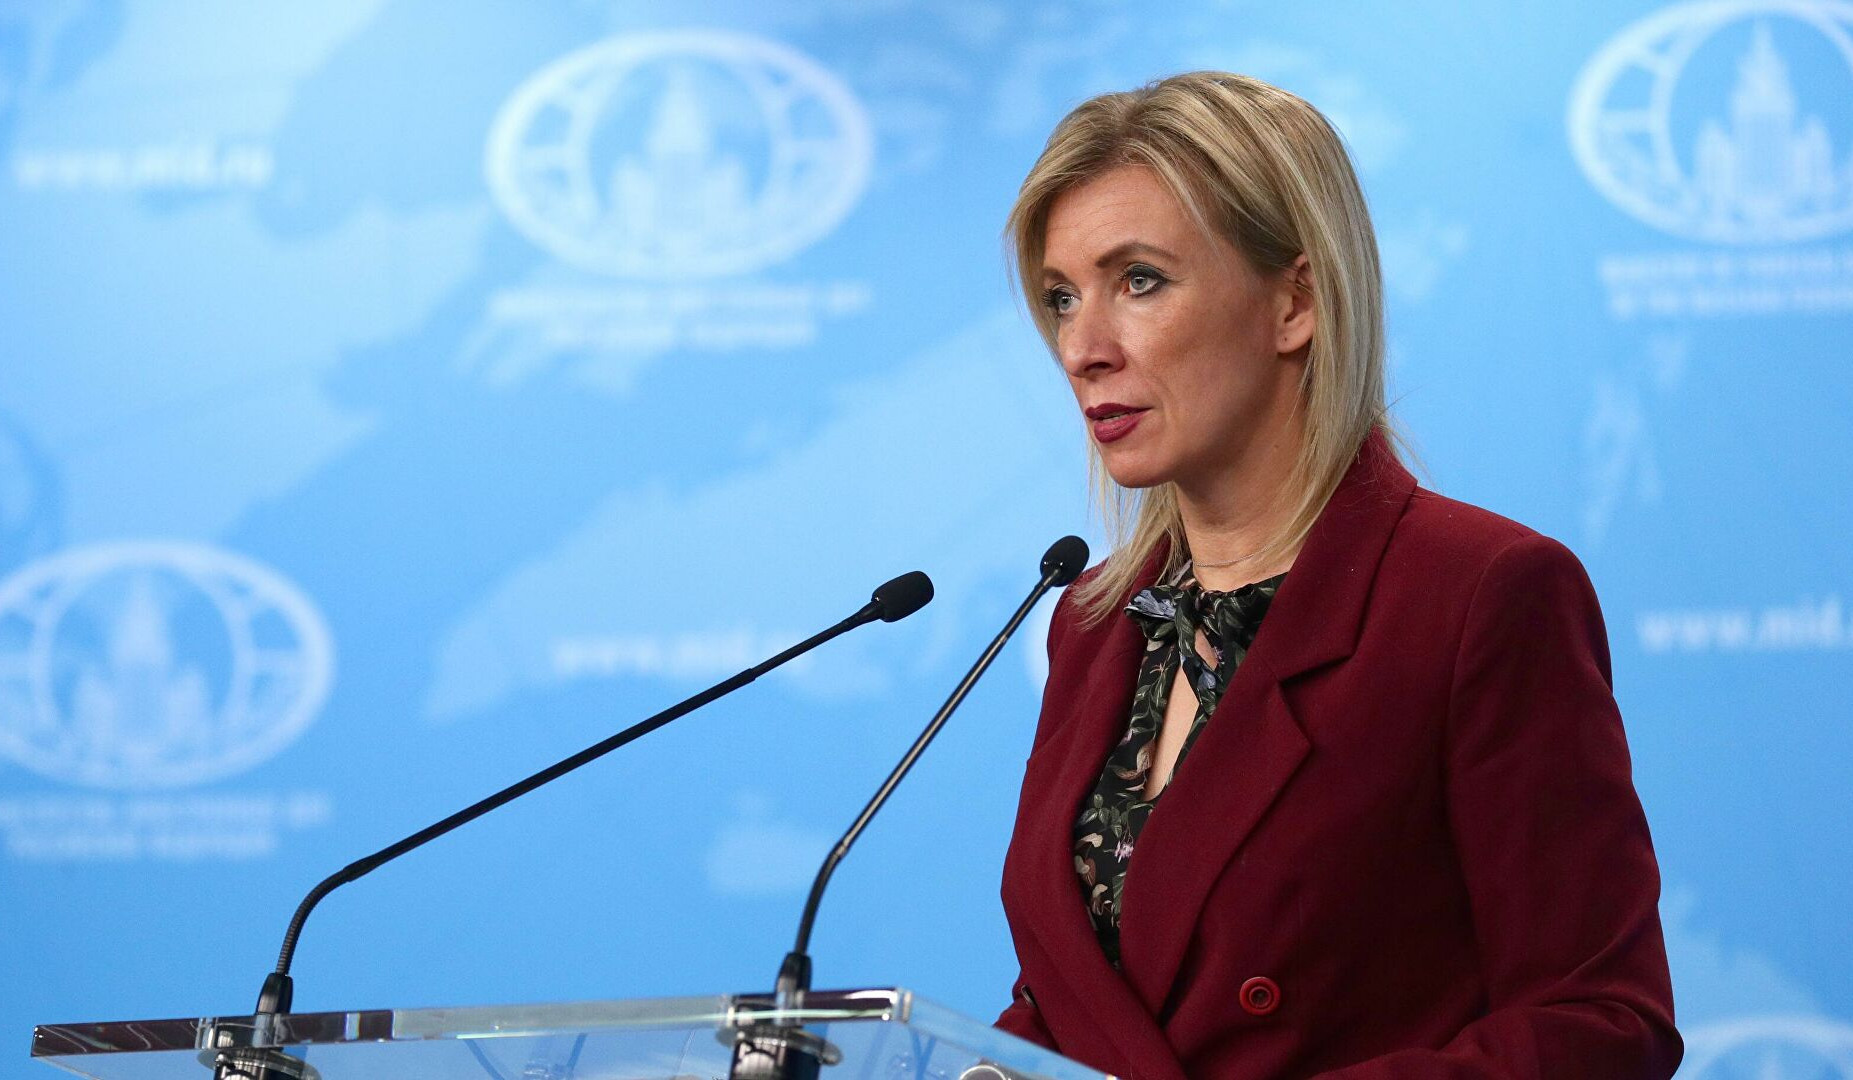 One cannot cast shadow on our peacekeepers: Zakharova on Azerbaijani provocative actions